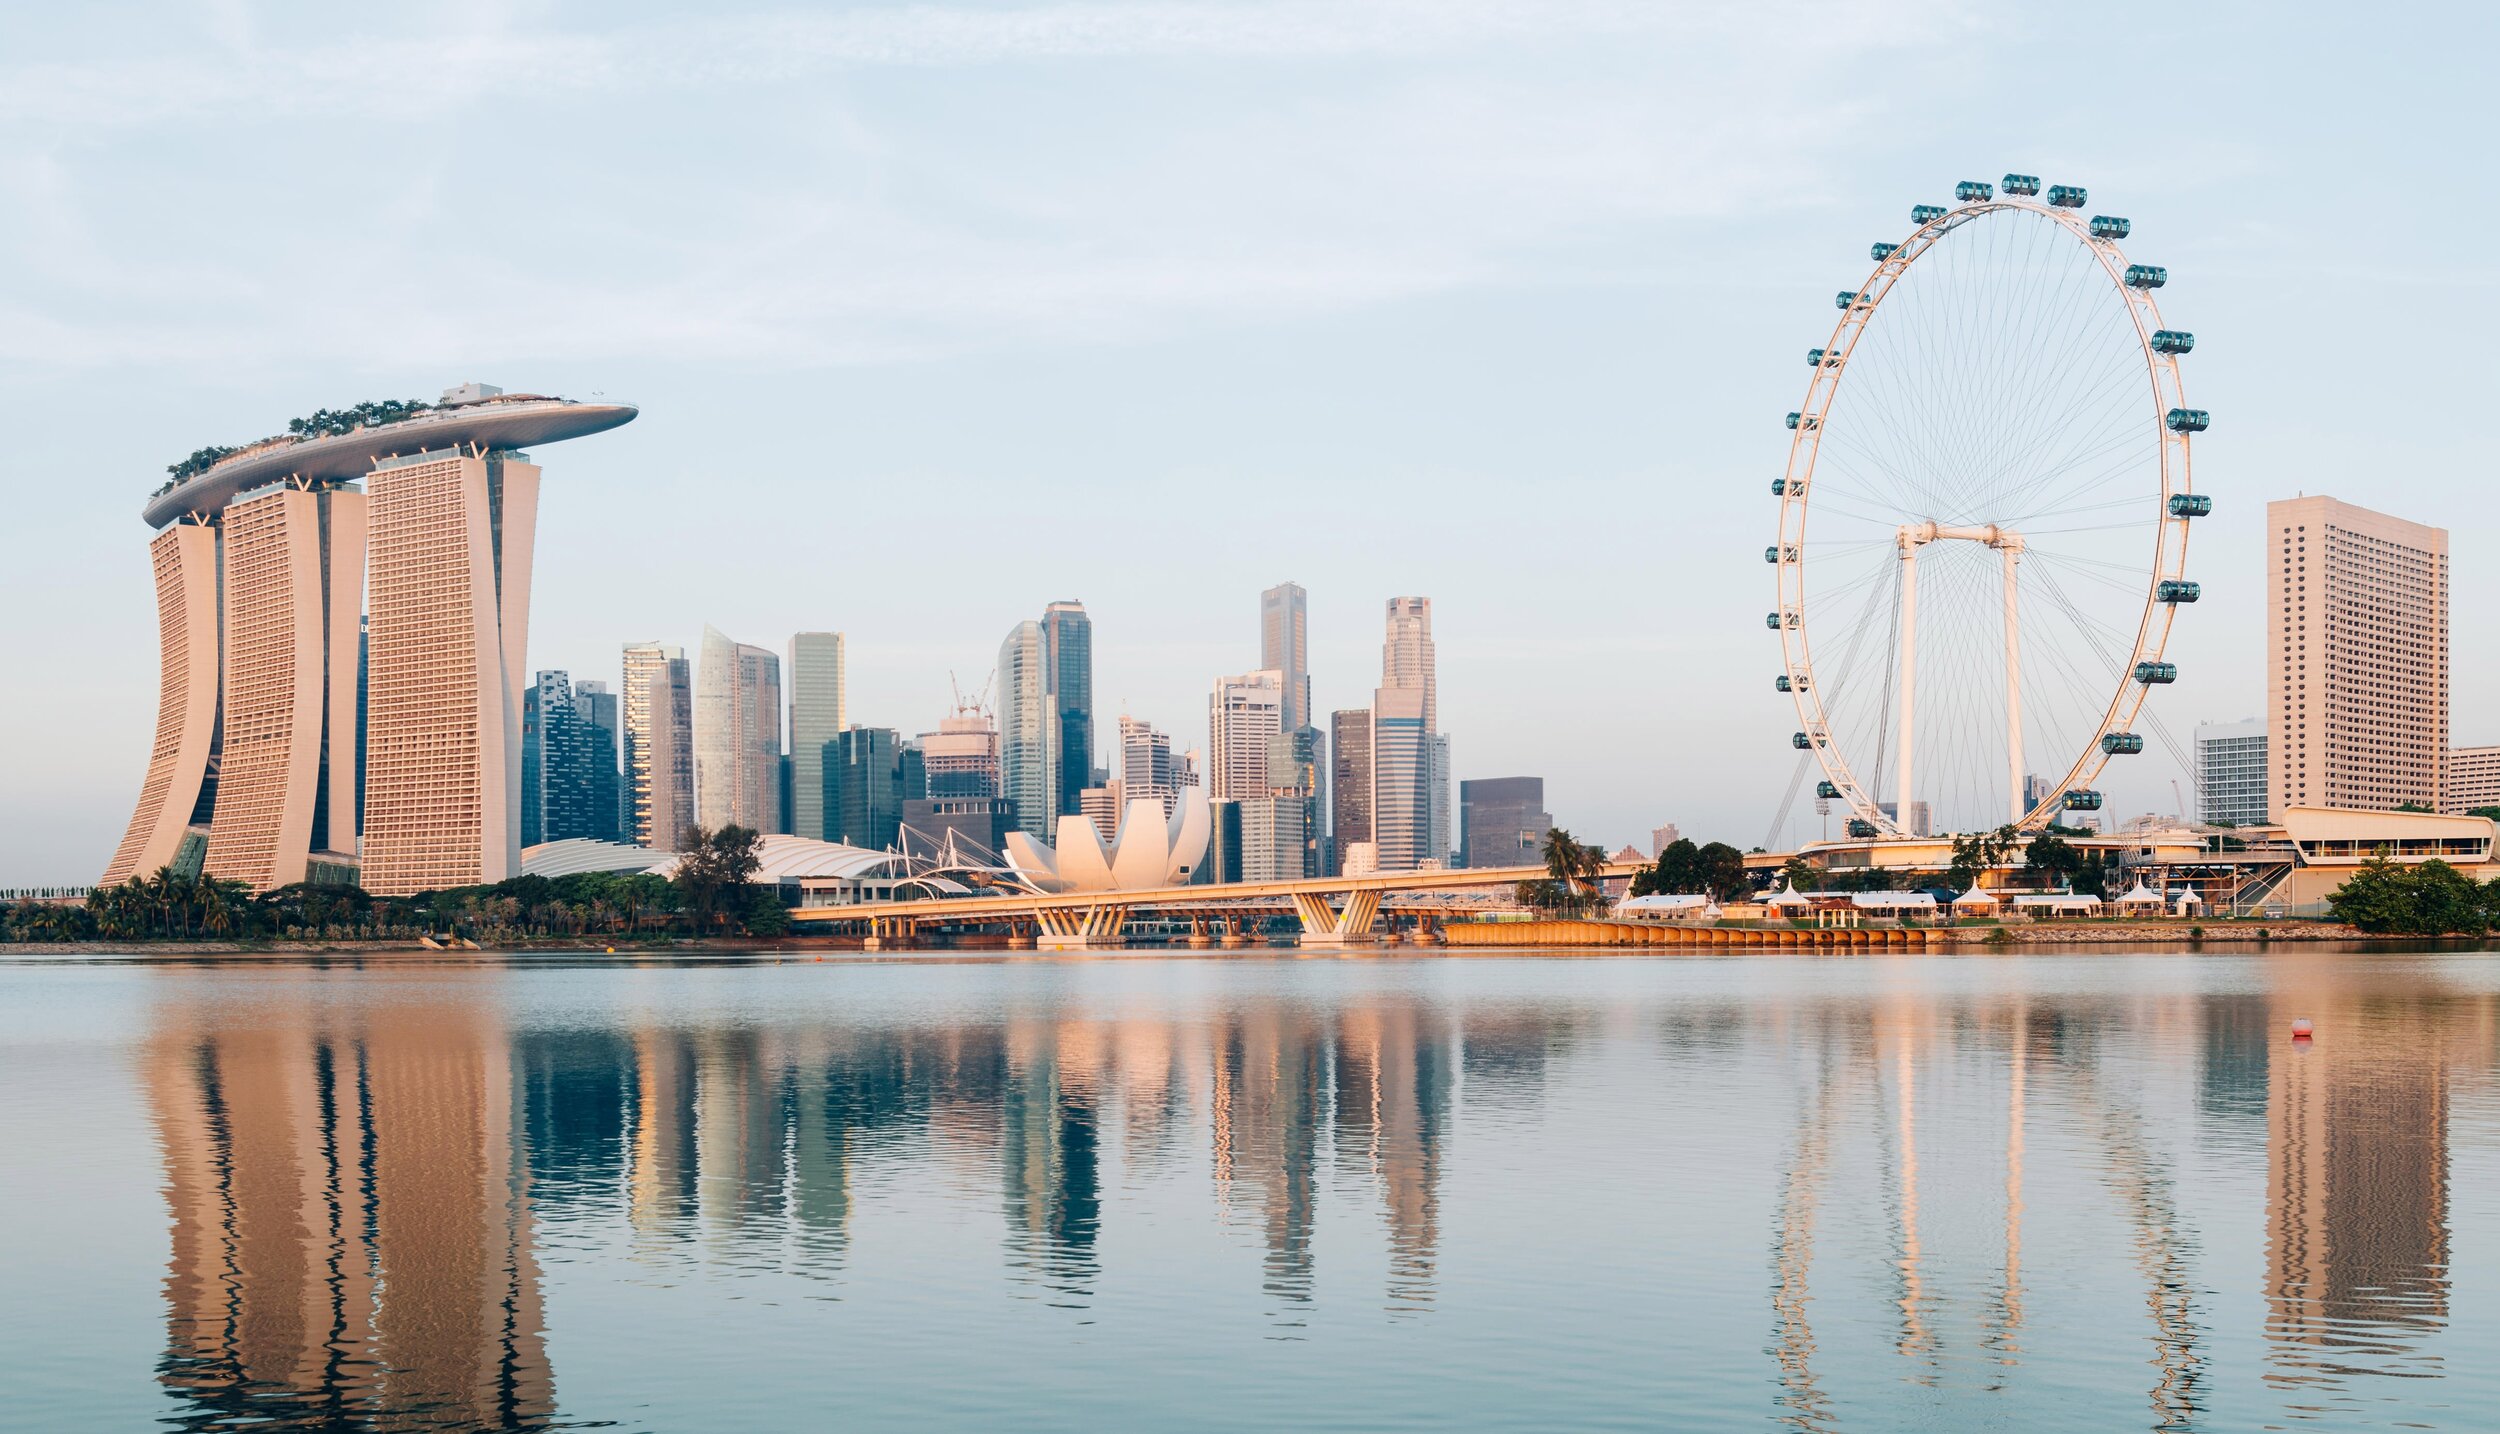 Singapore, the ideal city for career progression with a fast-paced city lifestyle